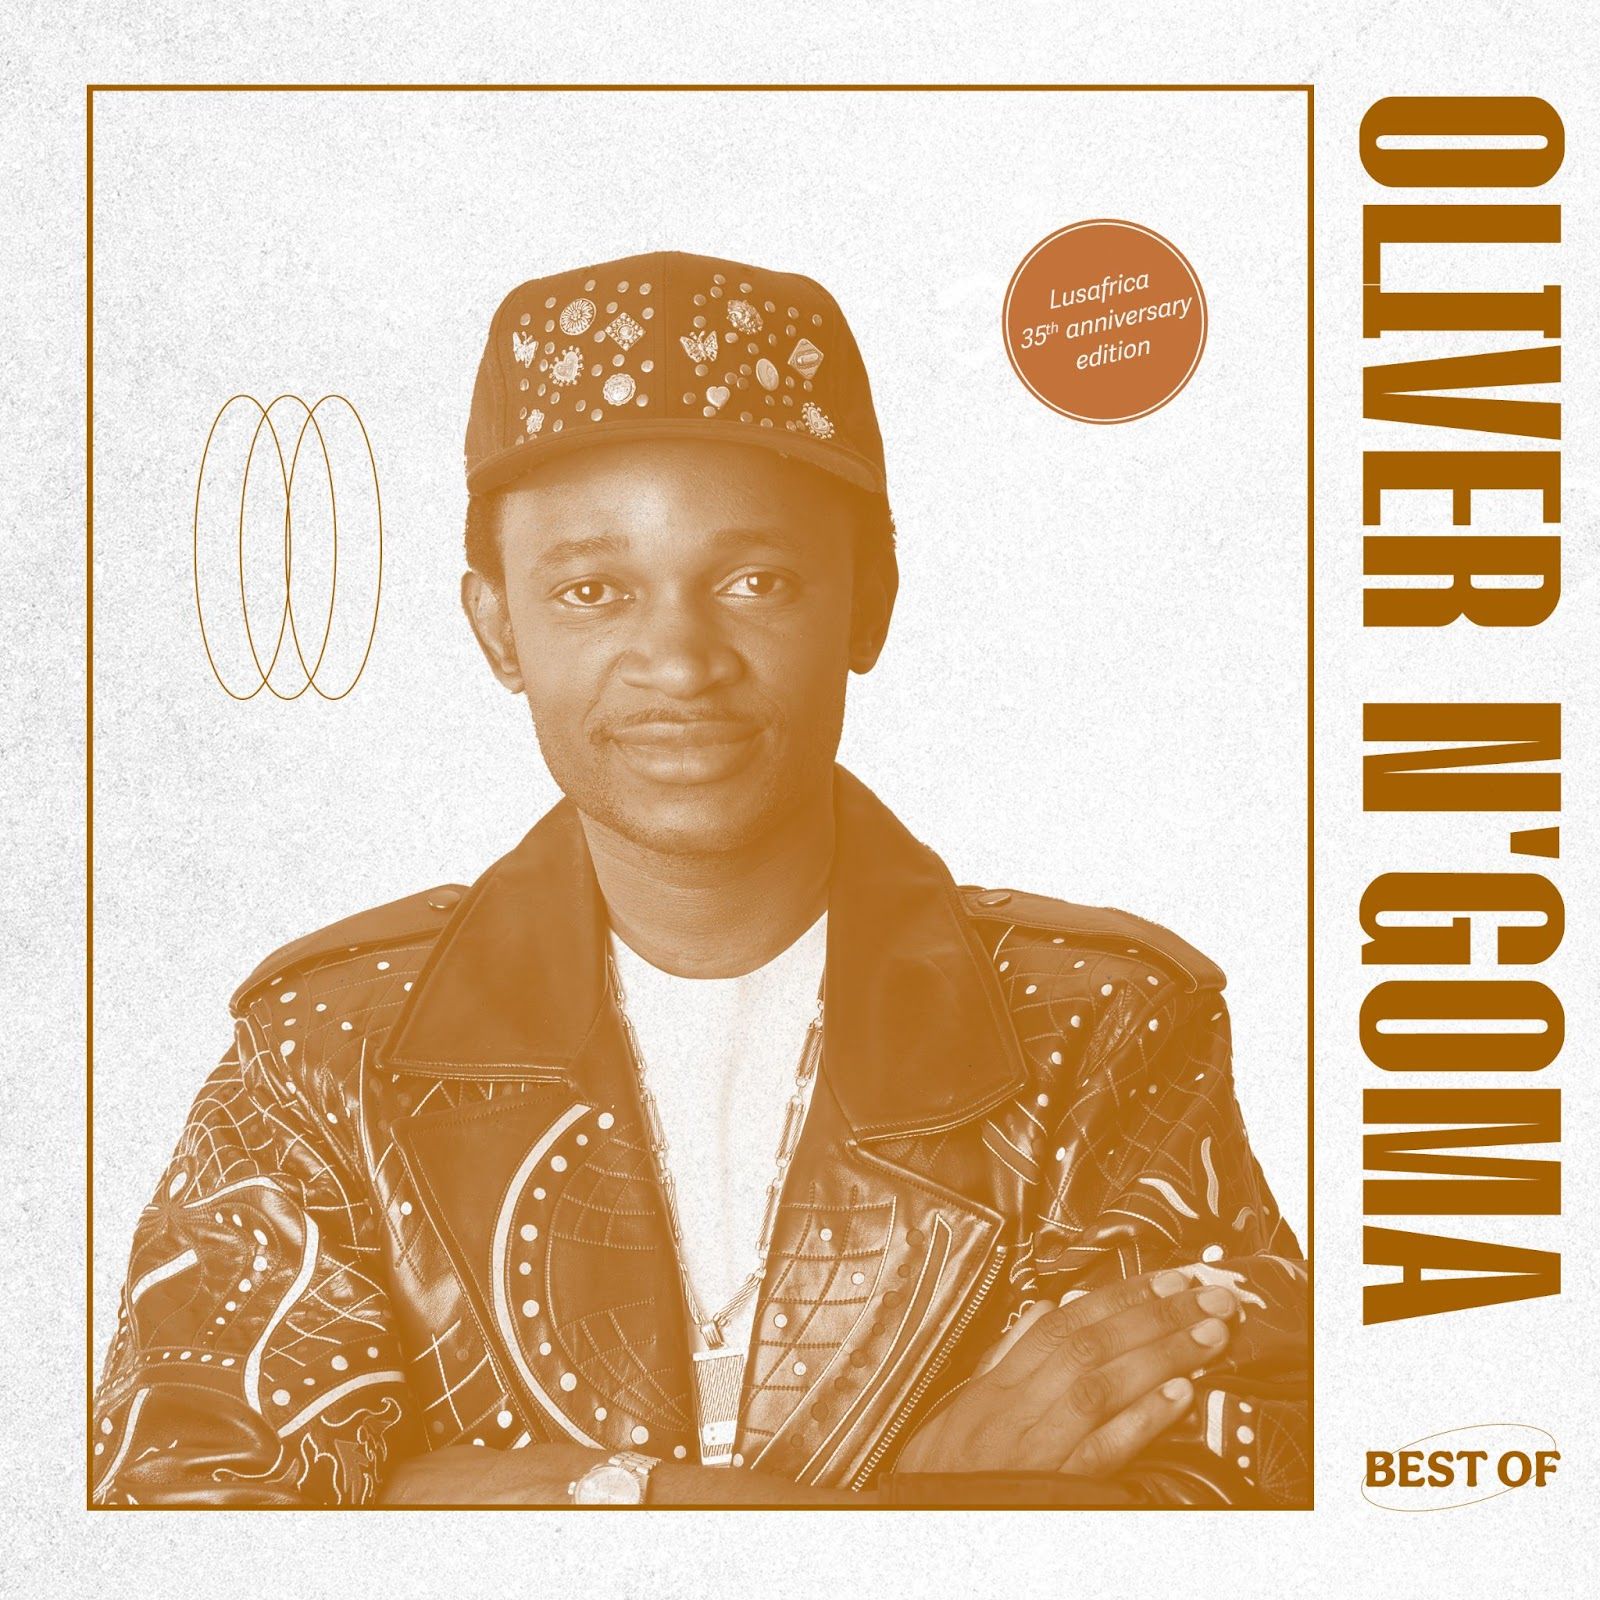 Oliver N'goma, Best Of - Lusafrica 35th Anniversary Edition